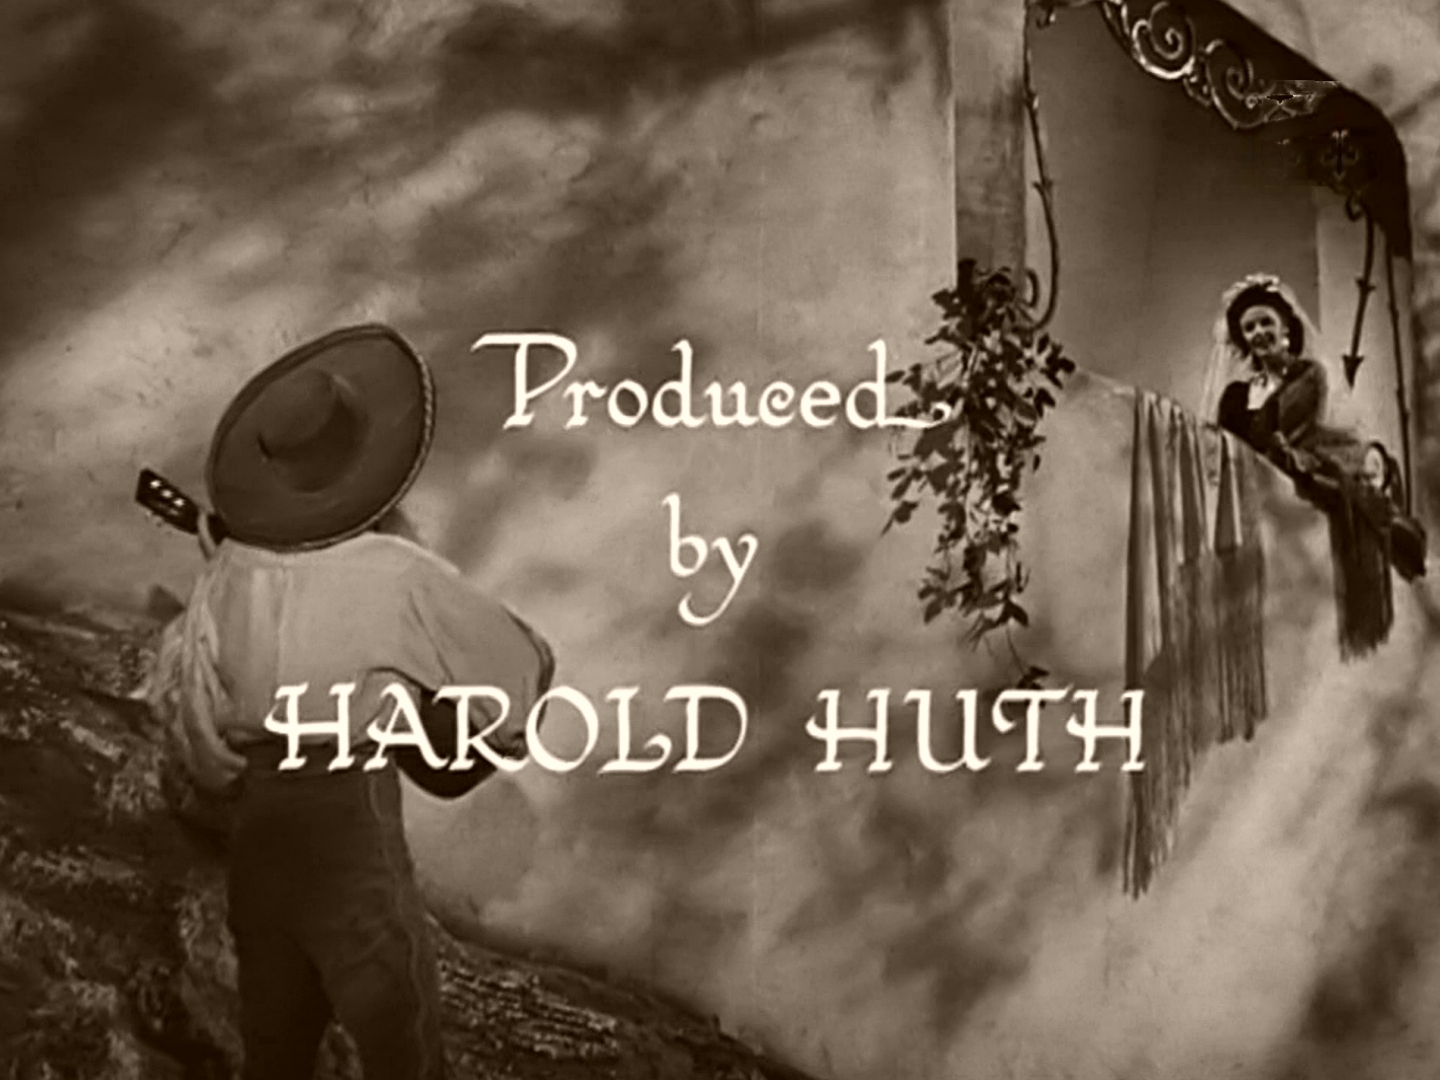 Main title from Caravan (1946) (12). Produced by Harold Huth